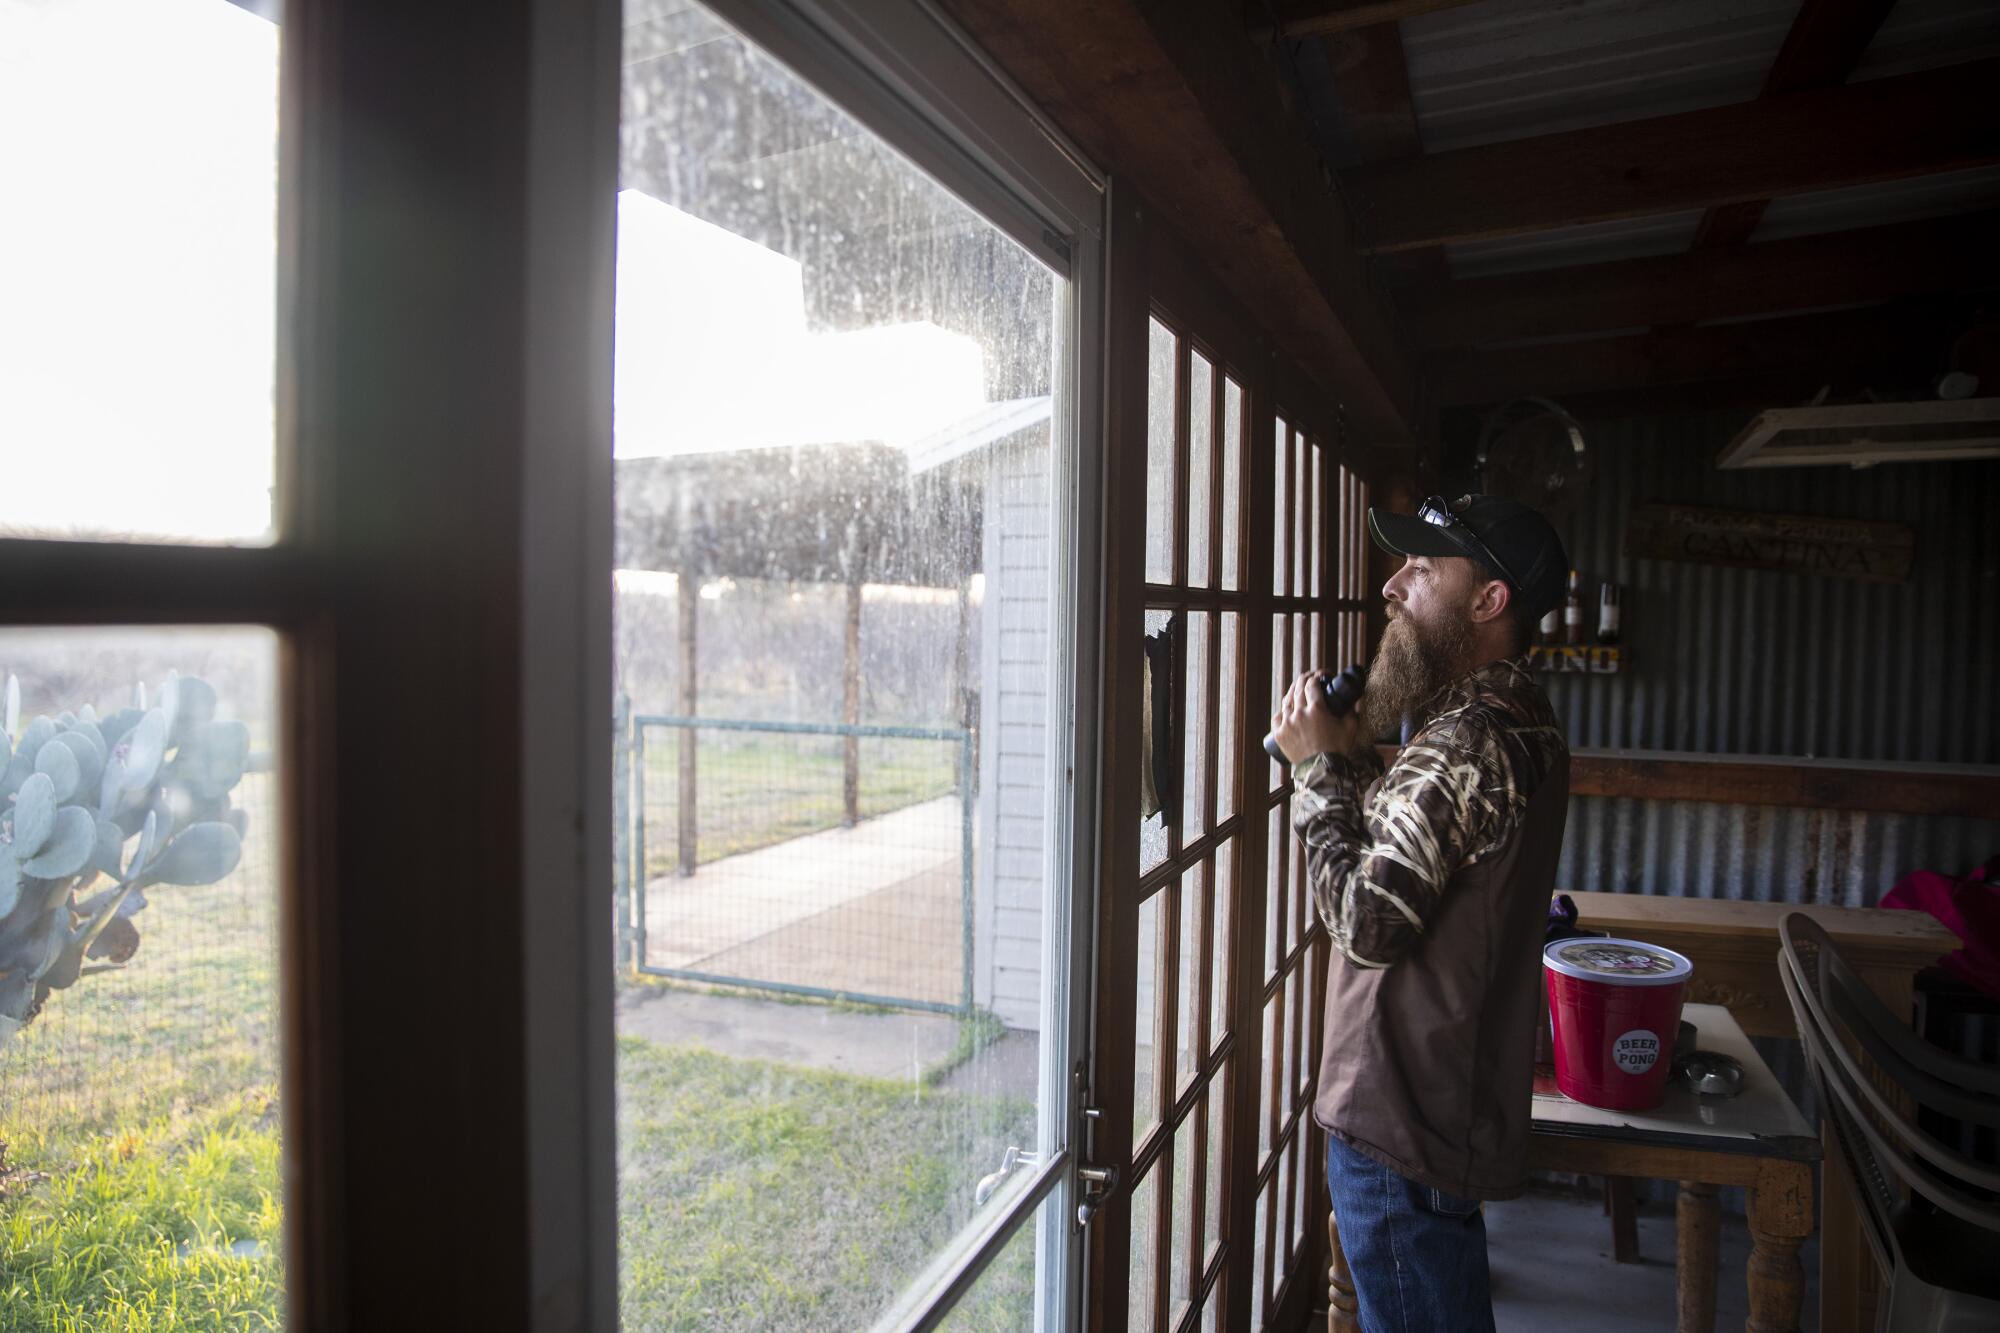 Fred Jones keeps an eye out for wild hogs in a wheat field from inside a rural cabin bunkhouse in Throckmorton County, Texas.